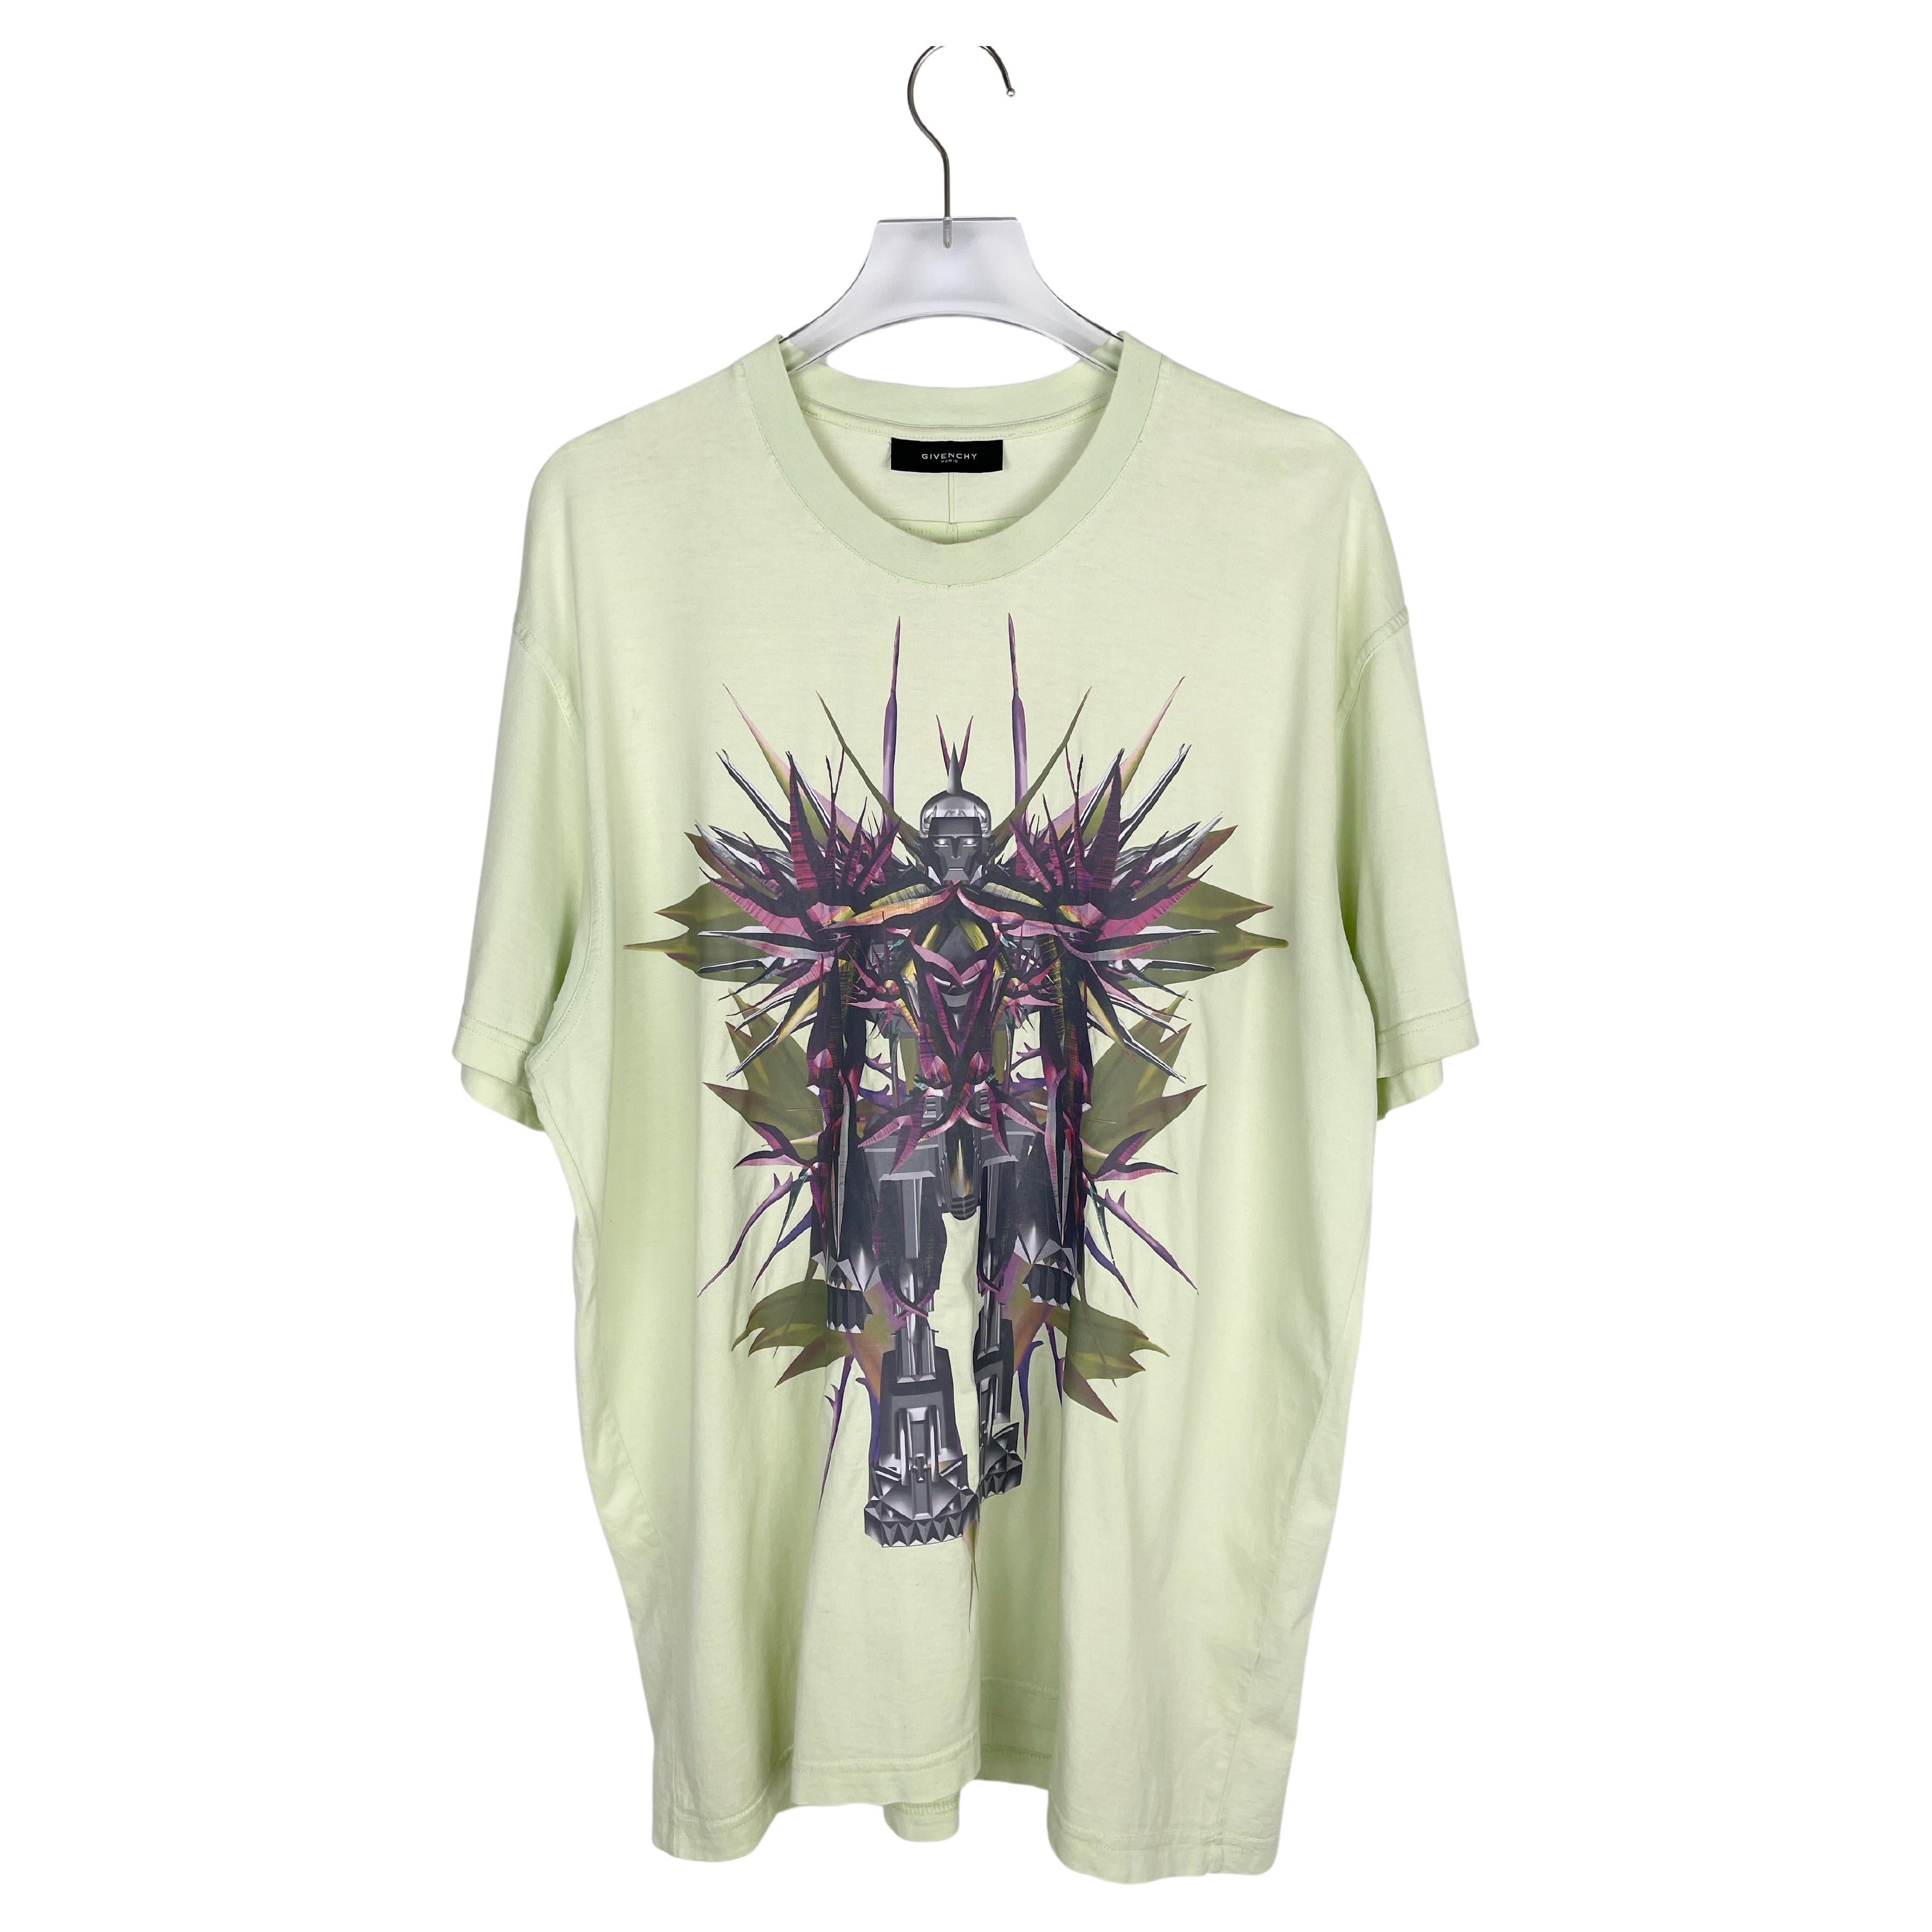 Givenchy S/S2012 "Birds Of Paradise" Robot T-Shirt For Sale